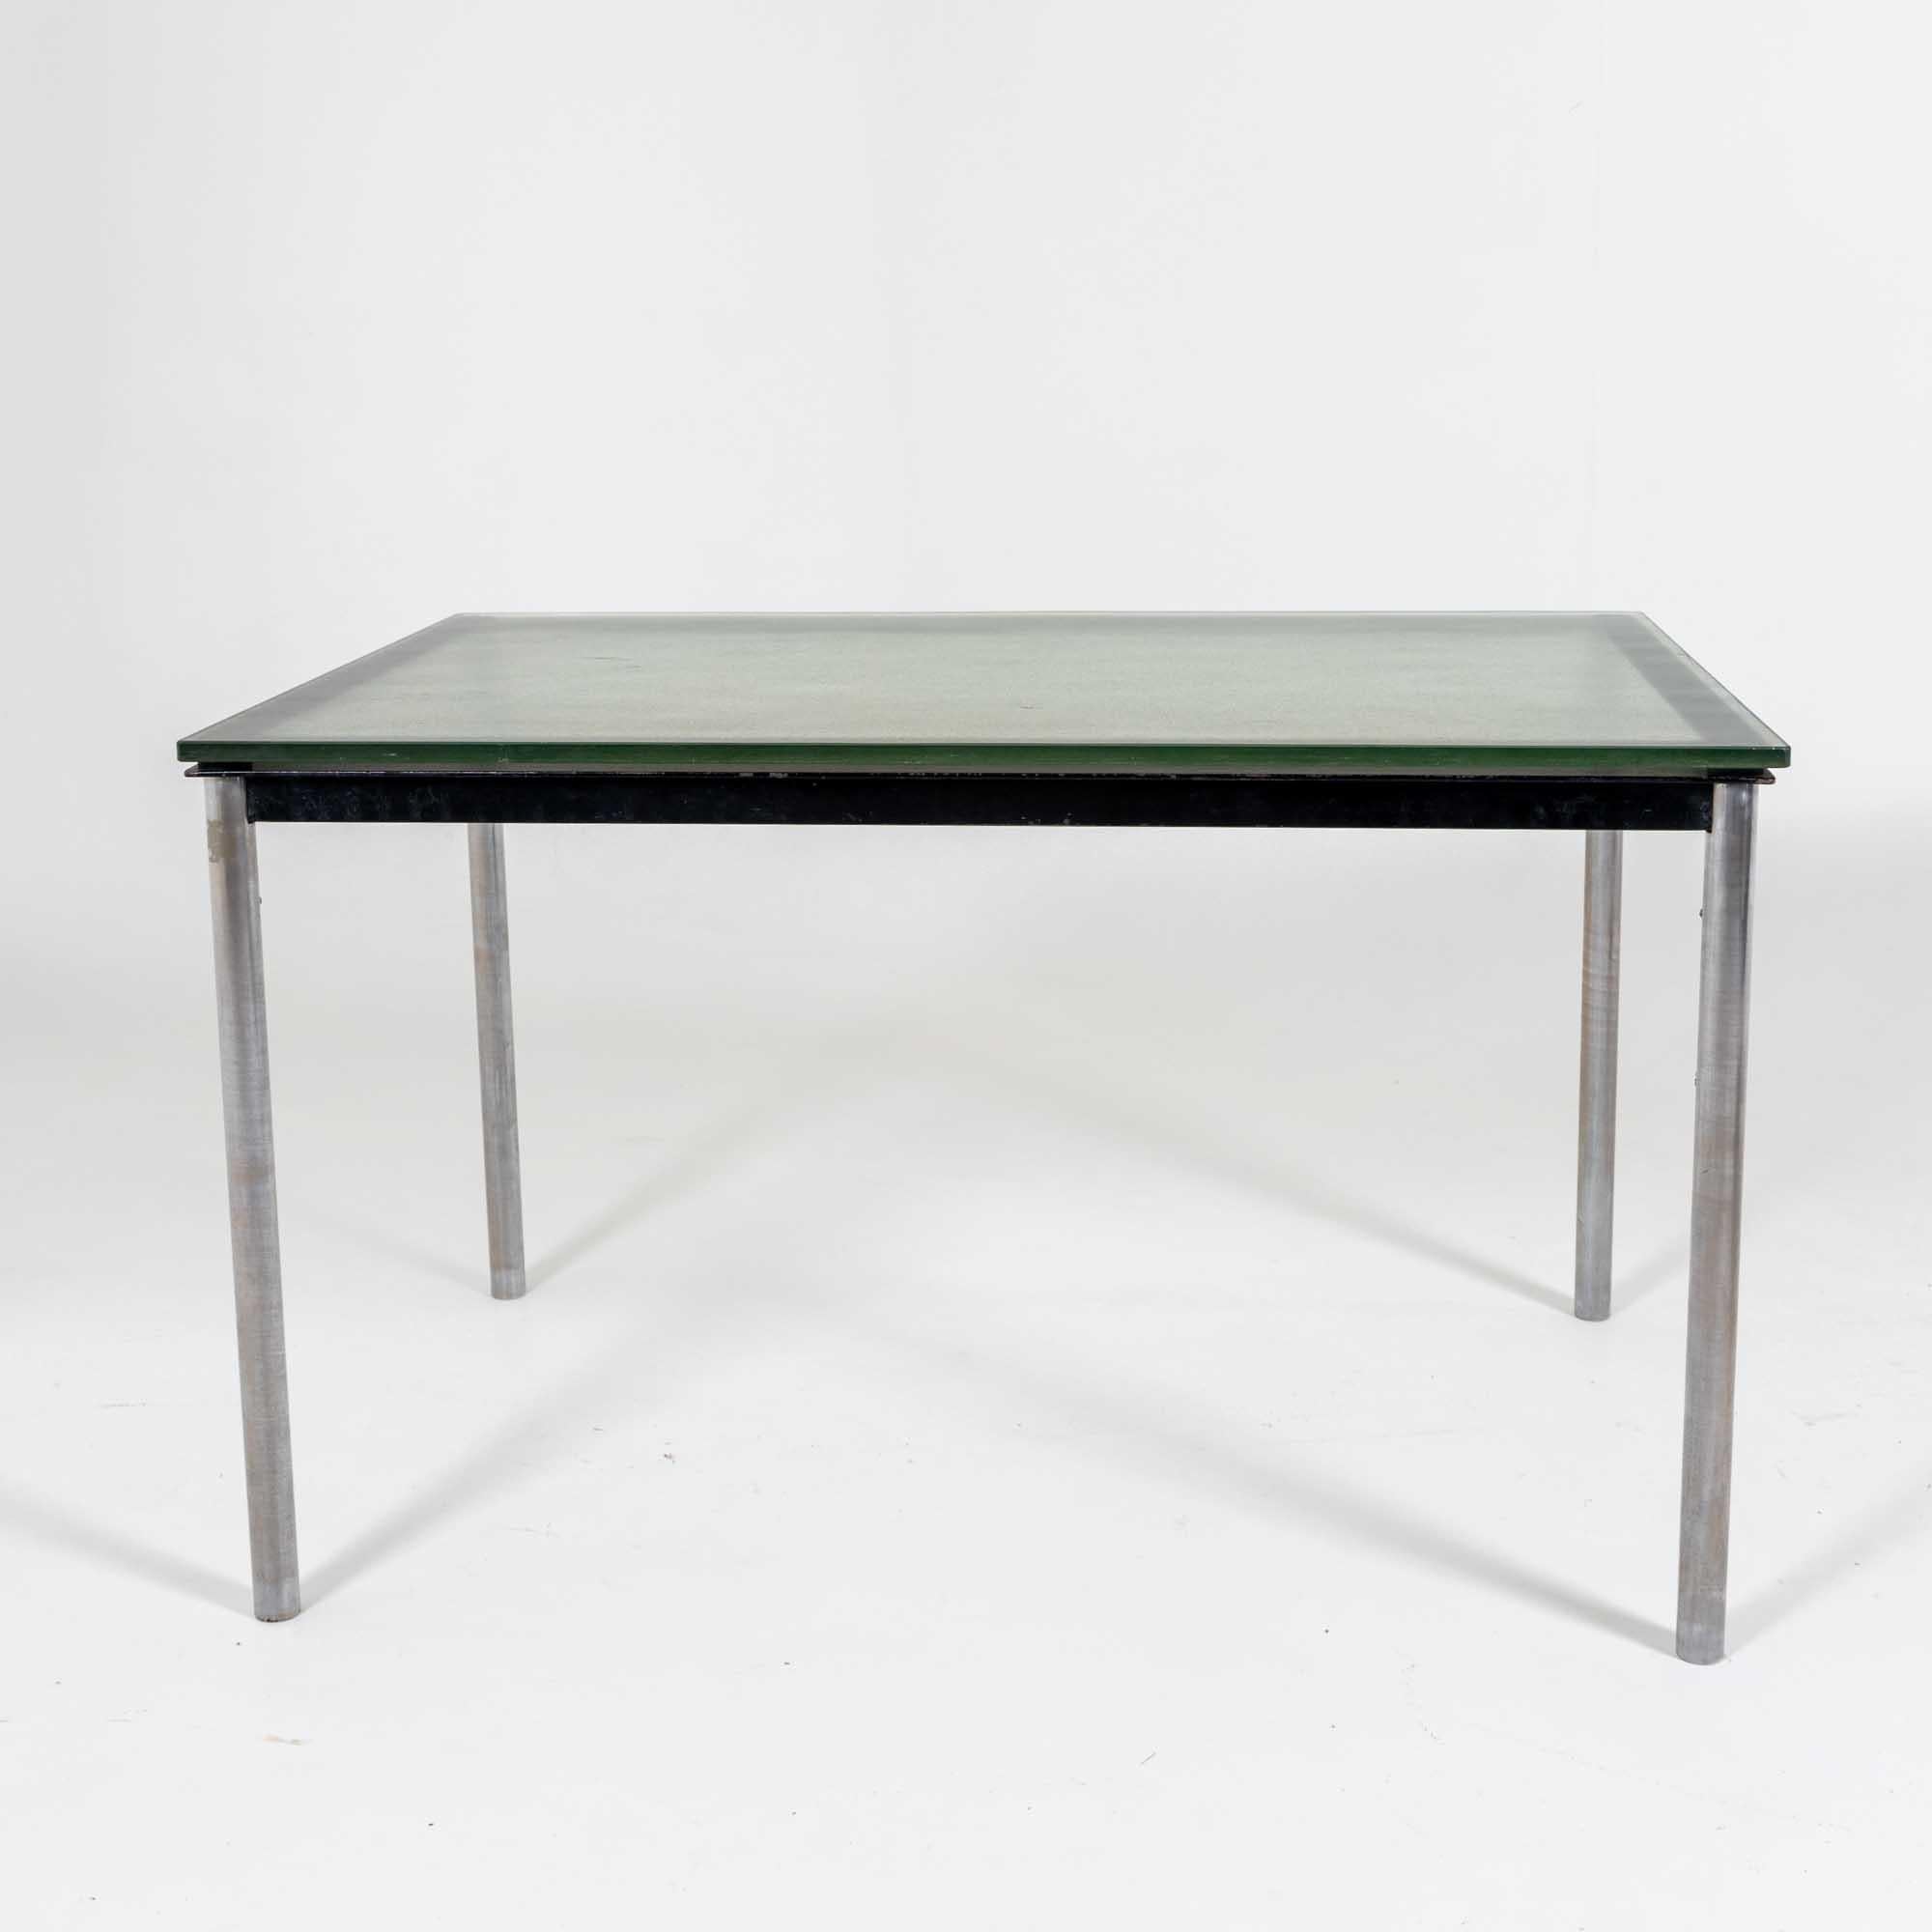 20th Century LC10 Table by Le Corbusier for Cassina, Chromed-Legs & Glass Top, Late 20th C. For Sale